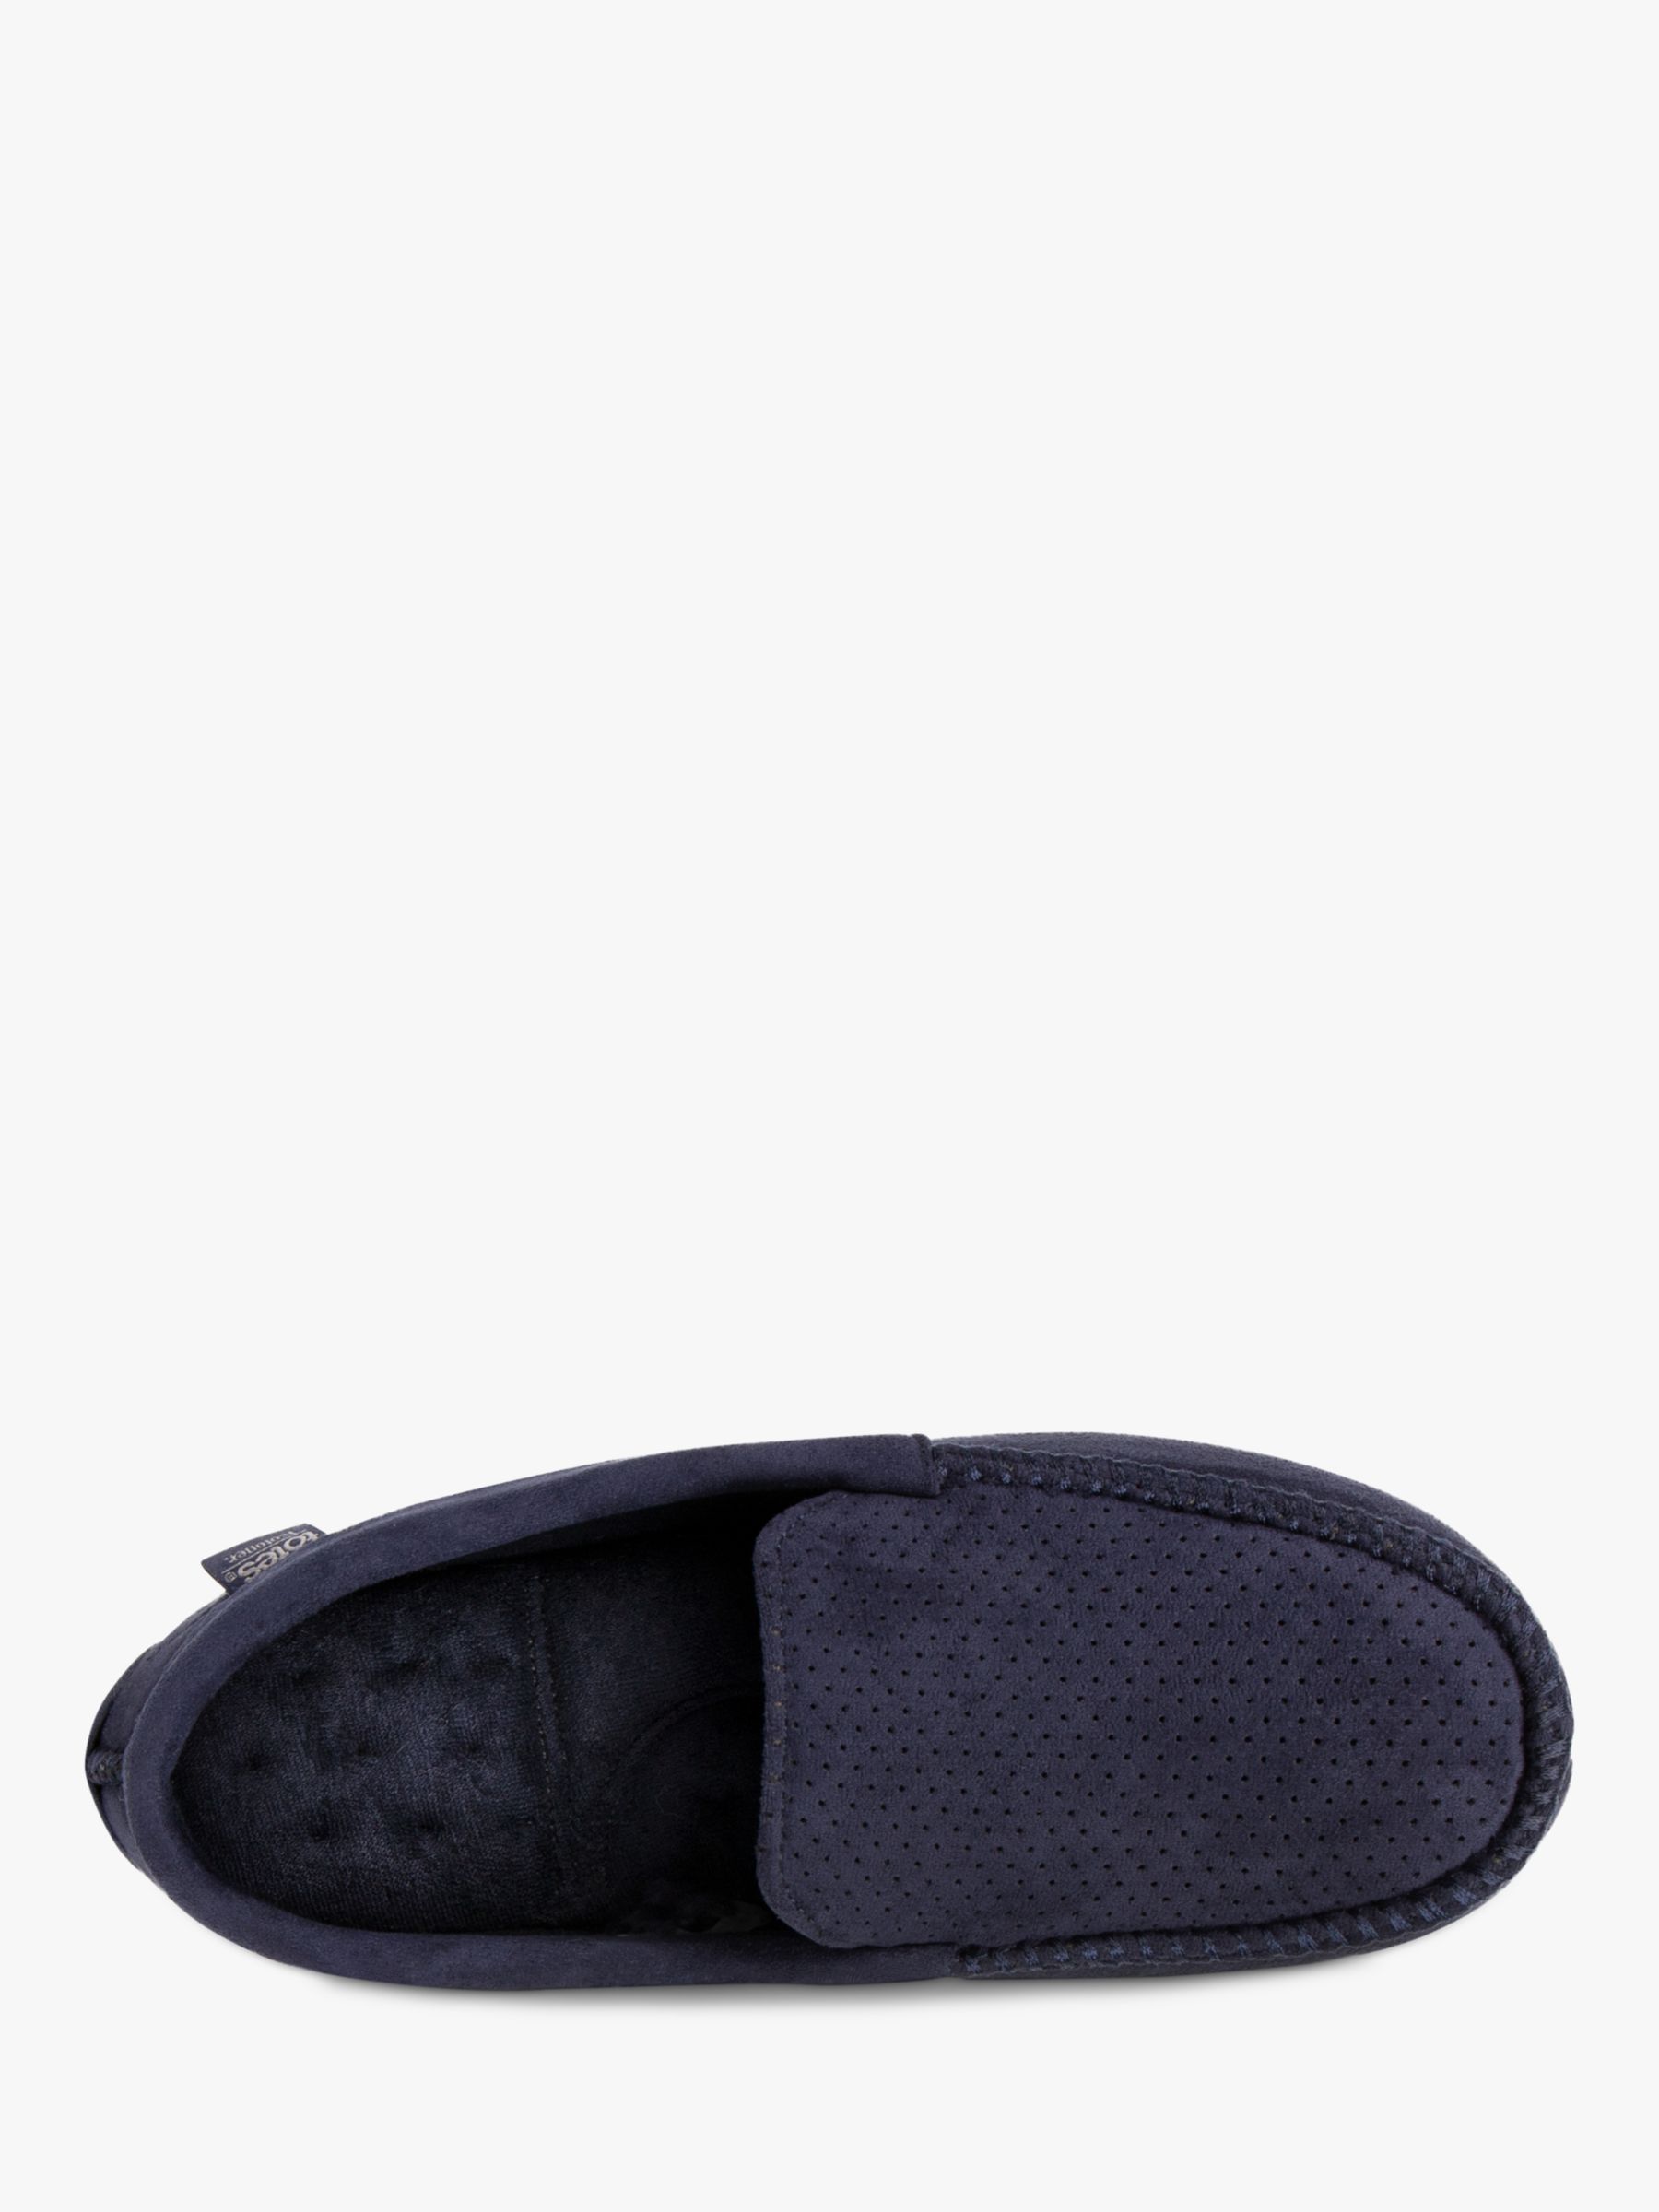 totes Airtex Suedette Moccasin Slippers, Navy